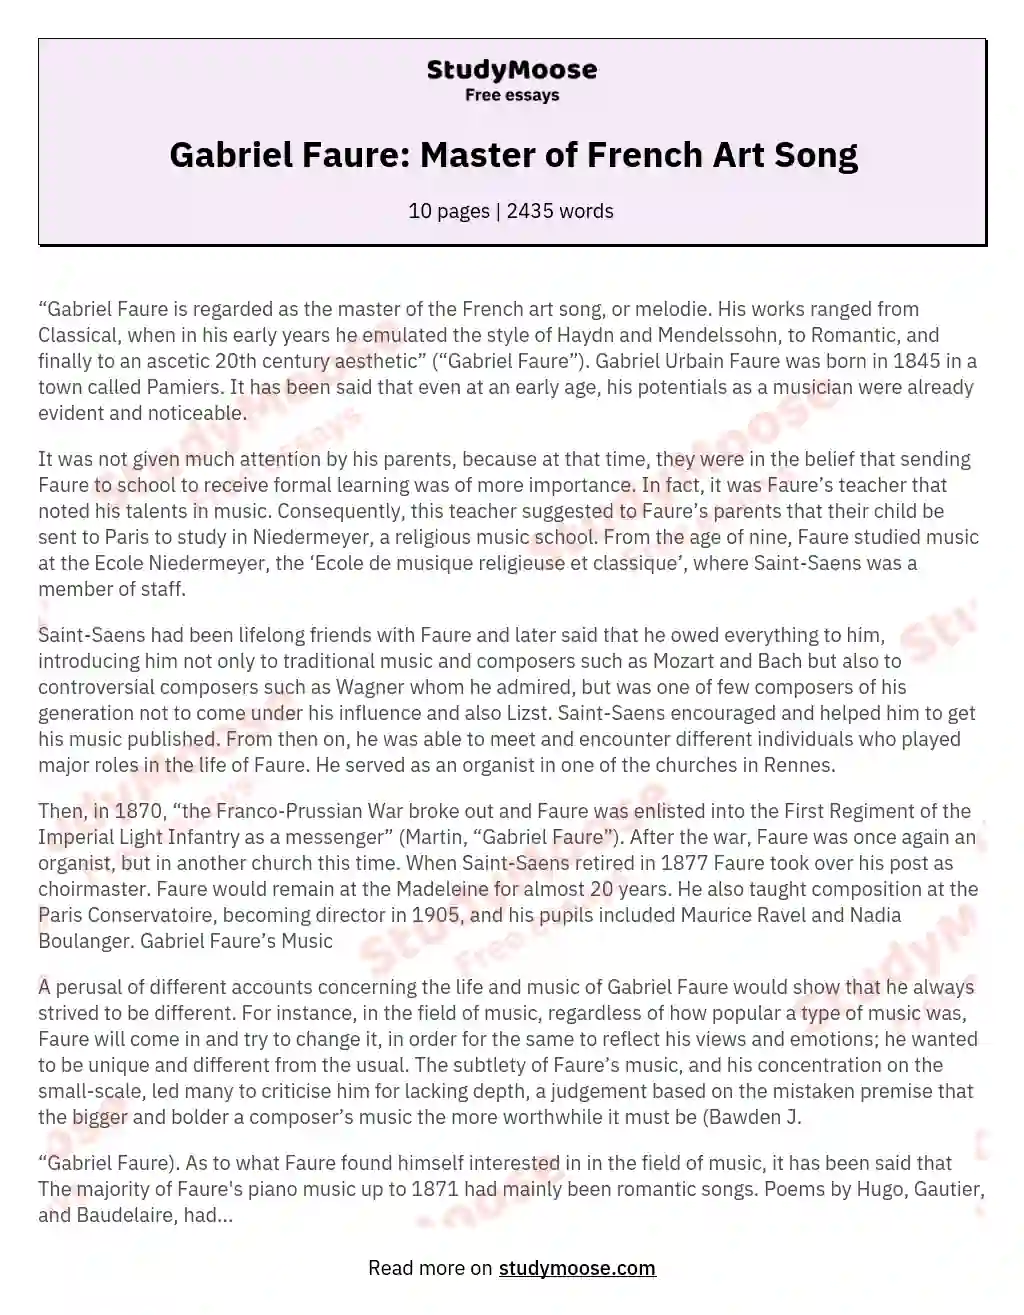 Gabriel Faure: Master of French Art Song essay